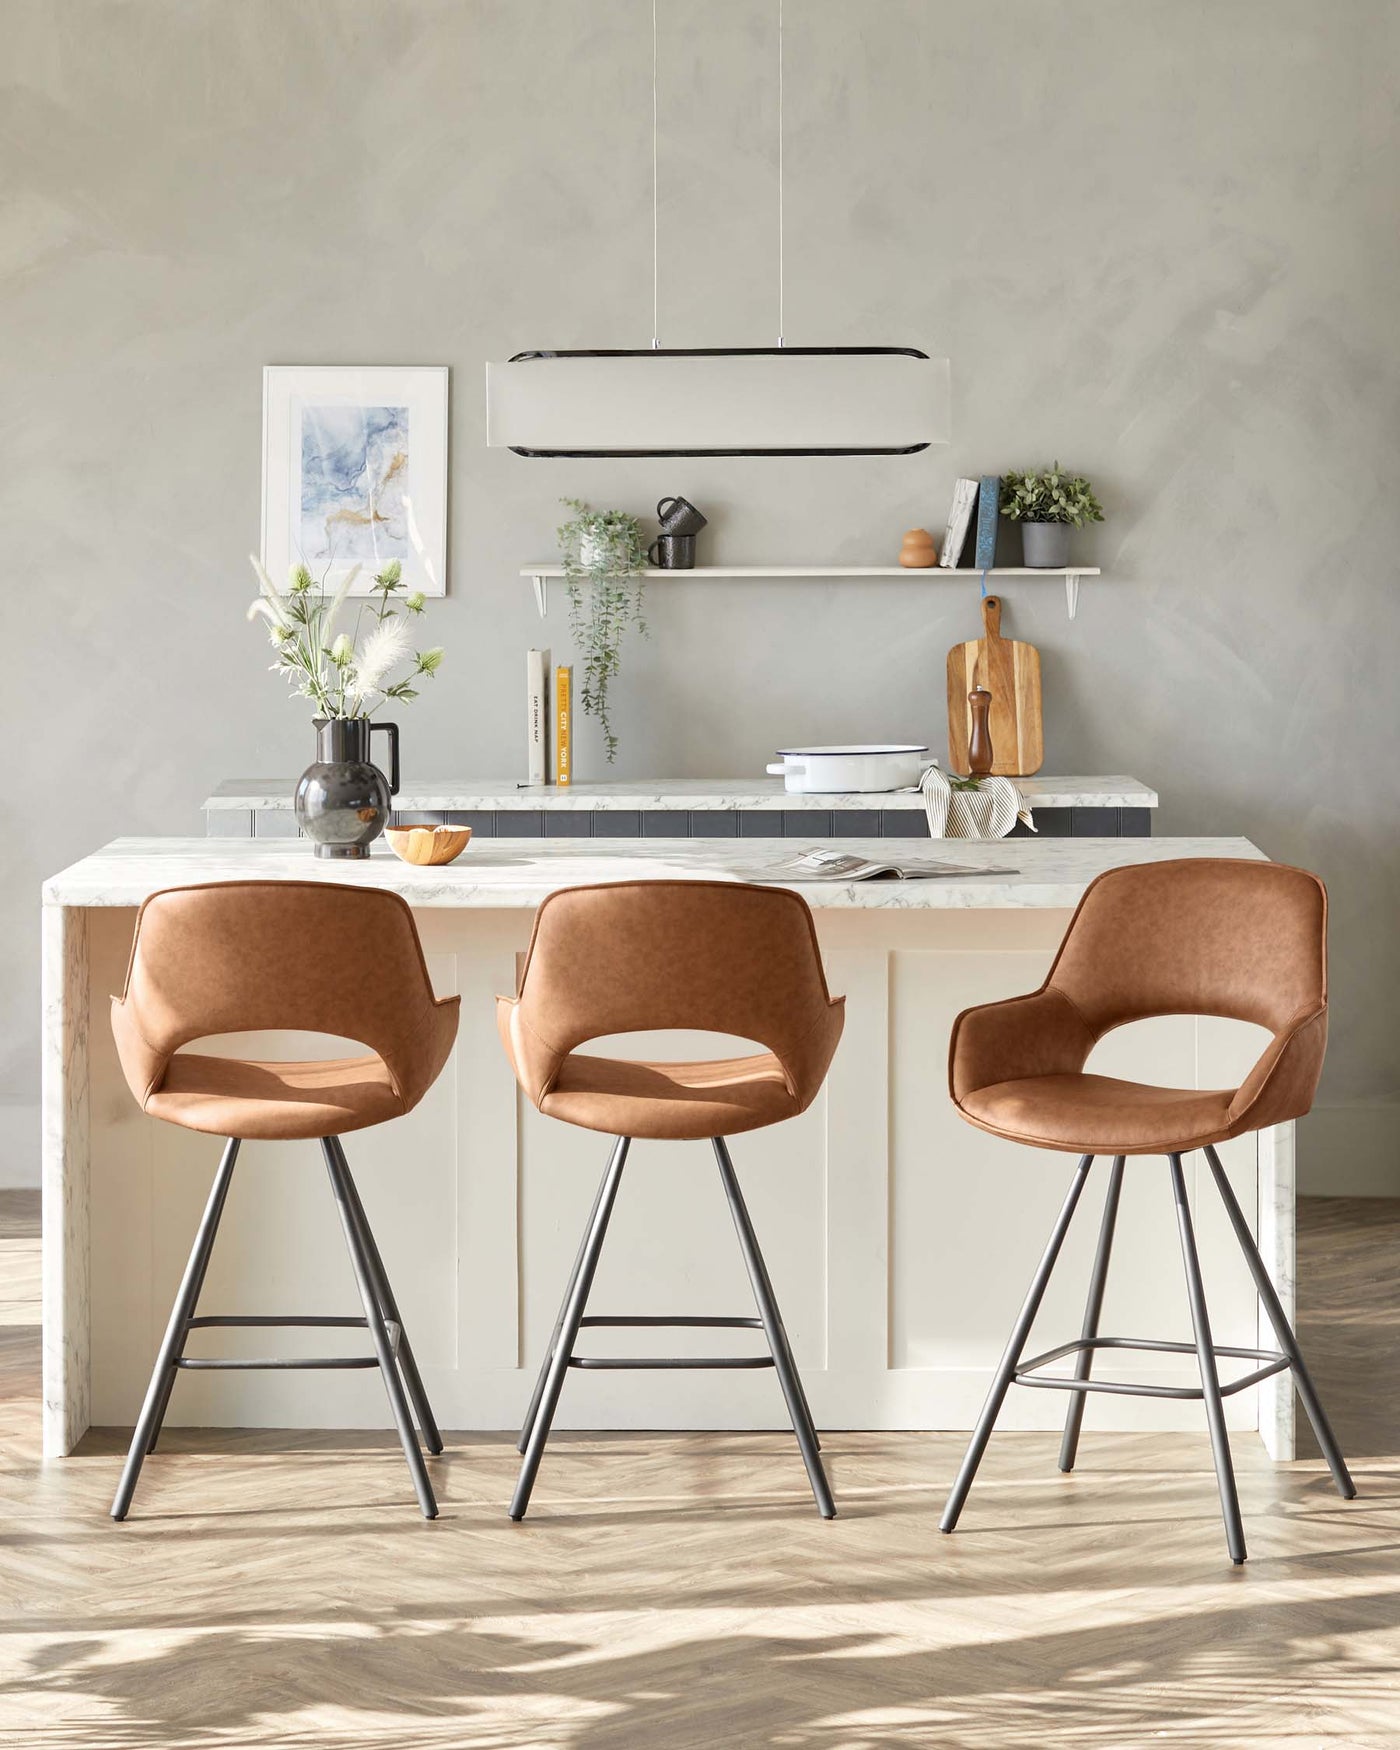 Modern kitchen interior featuring two elegant caramel-brown upholstered bar chairs with curved backrests and slender metallic legs, complementing a white marble-topped kitchen island.